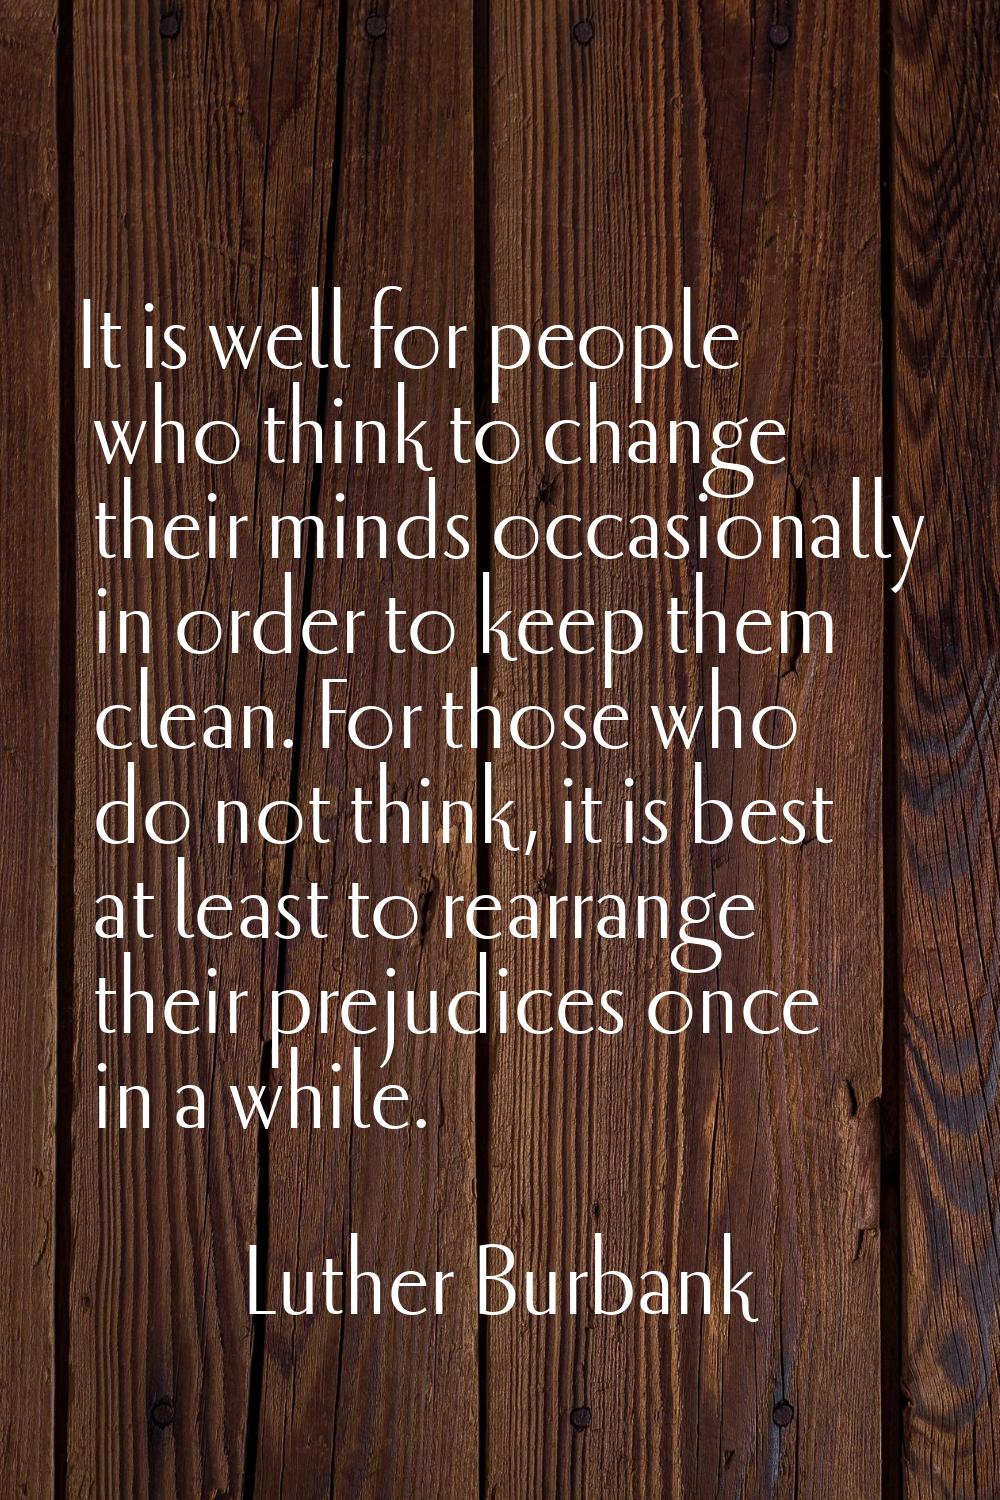 It is well for people who think to change their minds occasionally in order to keep them clean. For